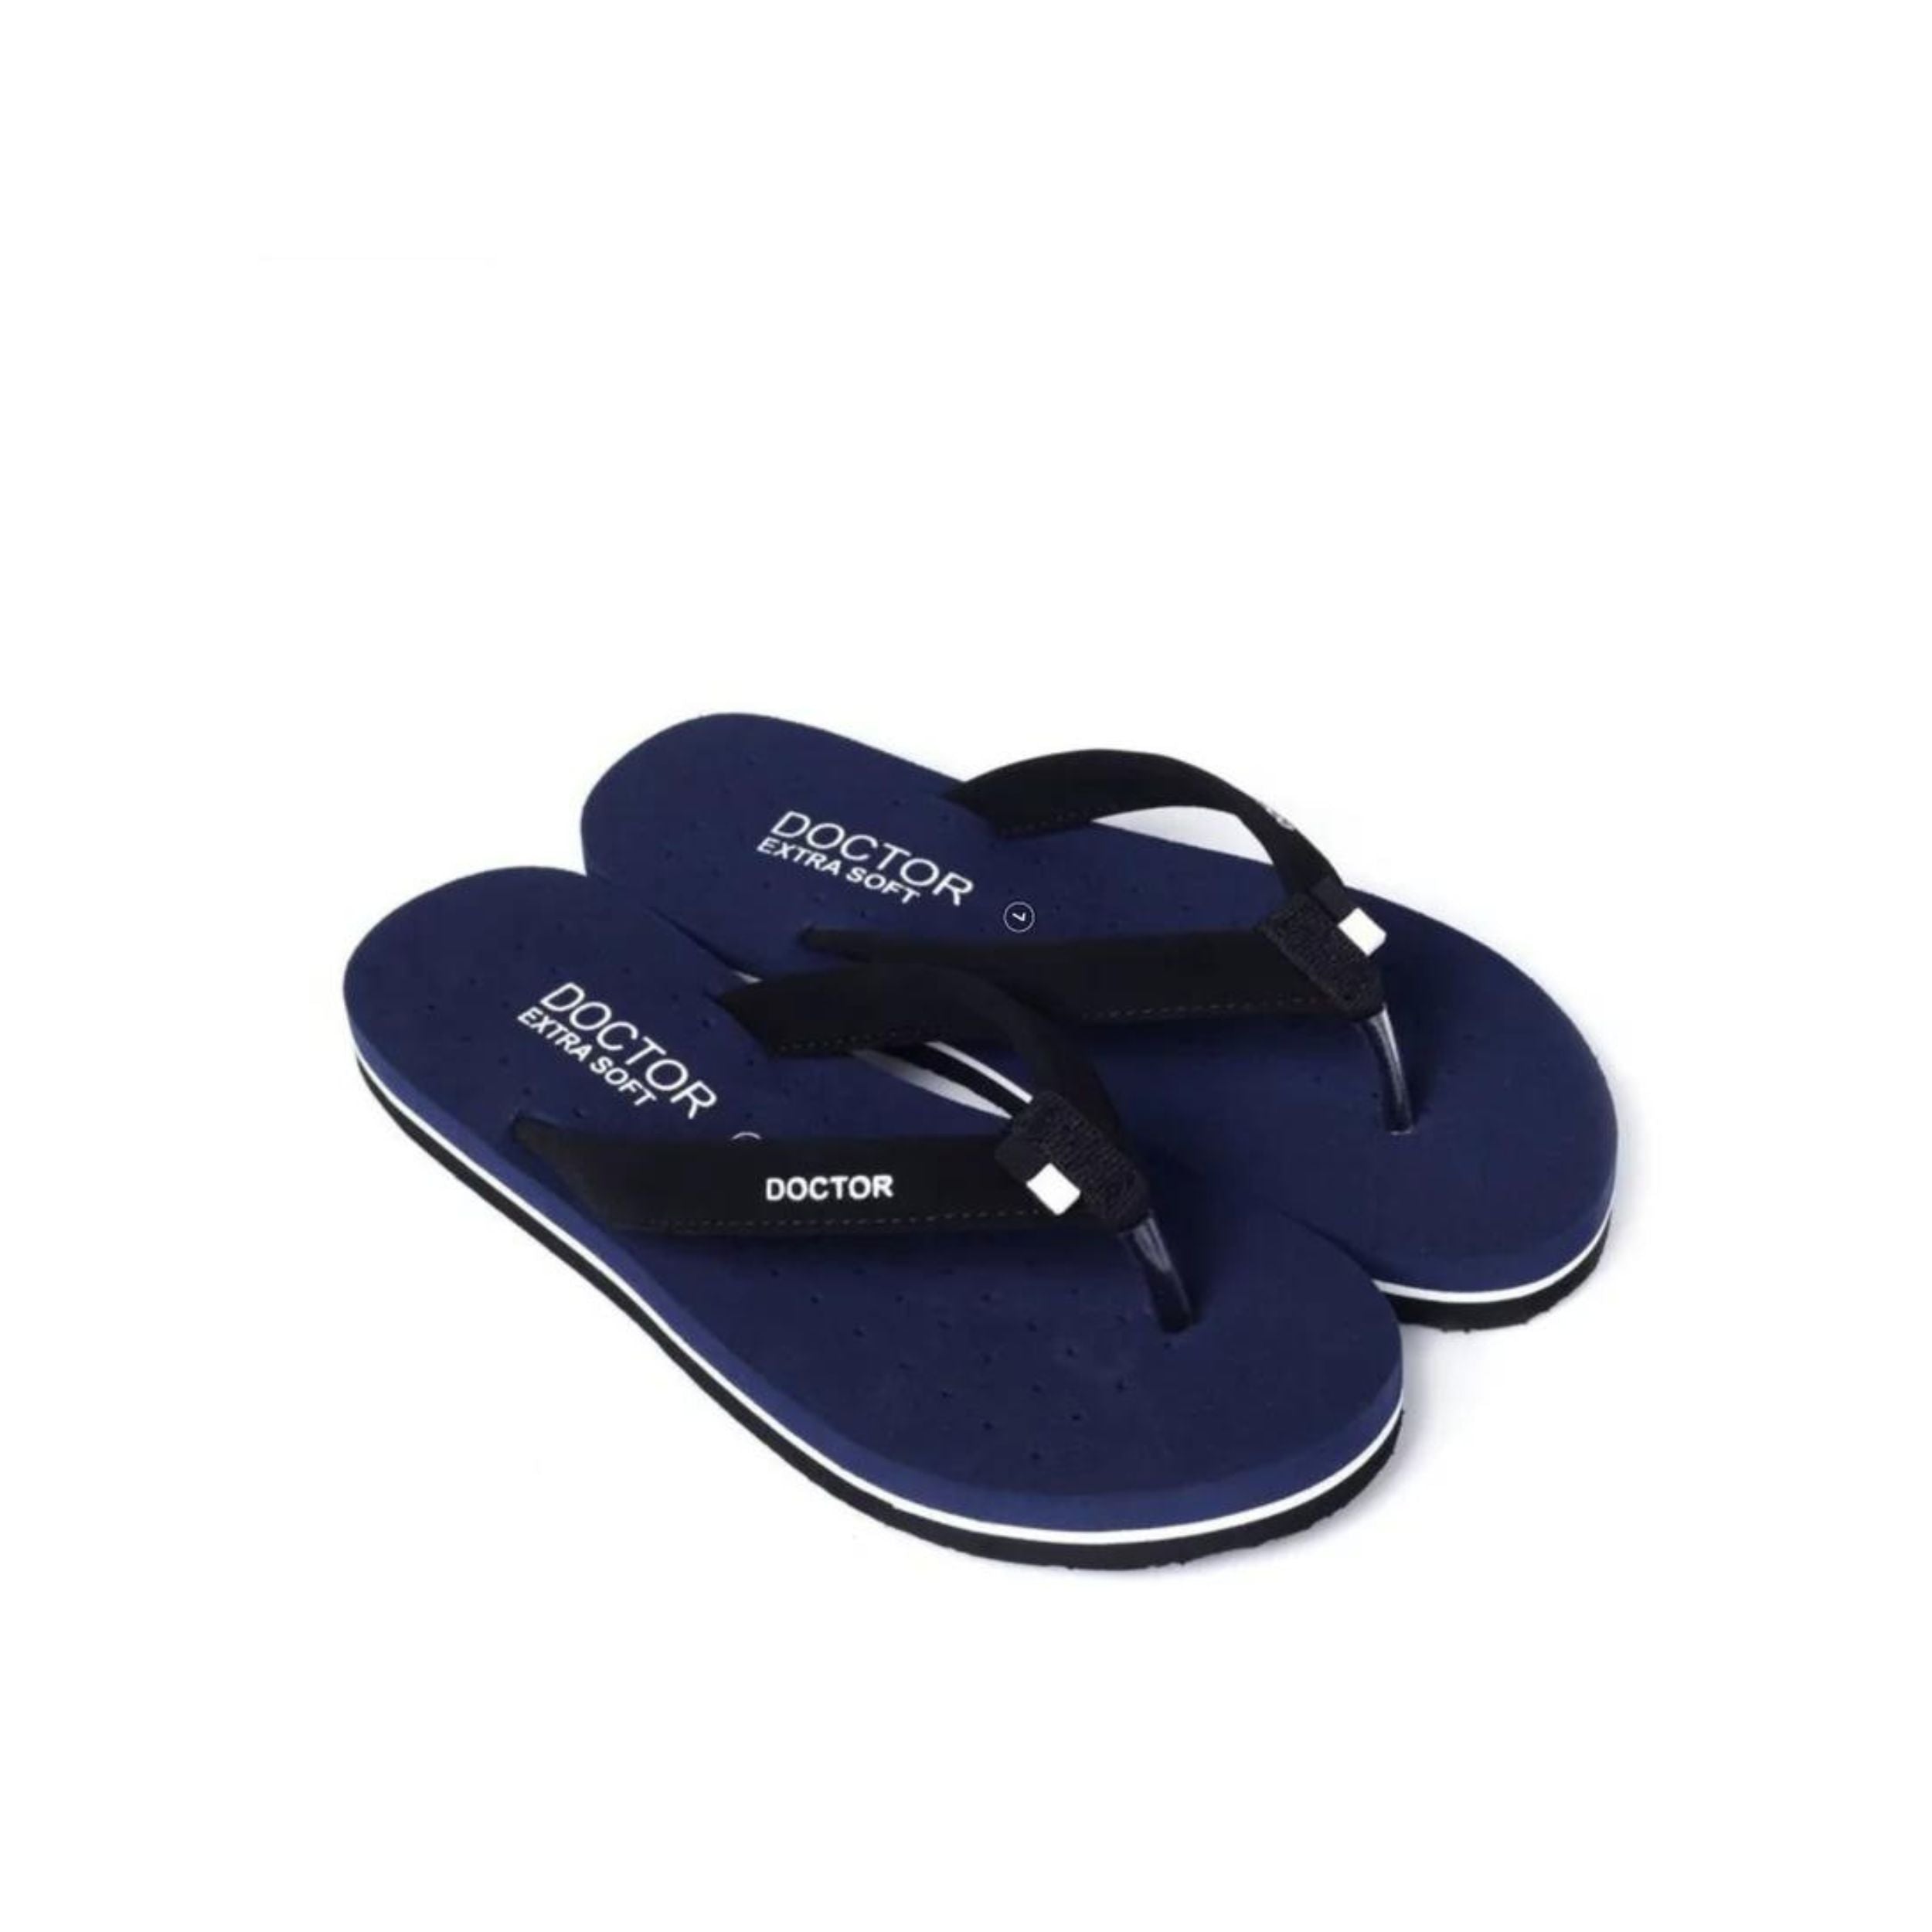 OrthoCare Slippers and Flip Flops for Women